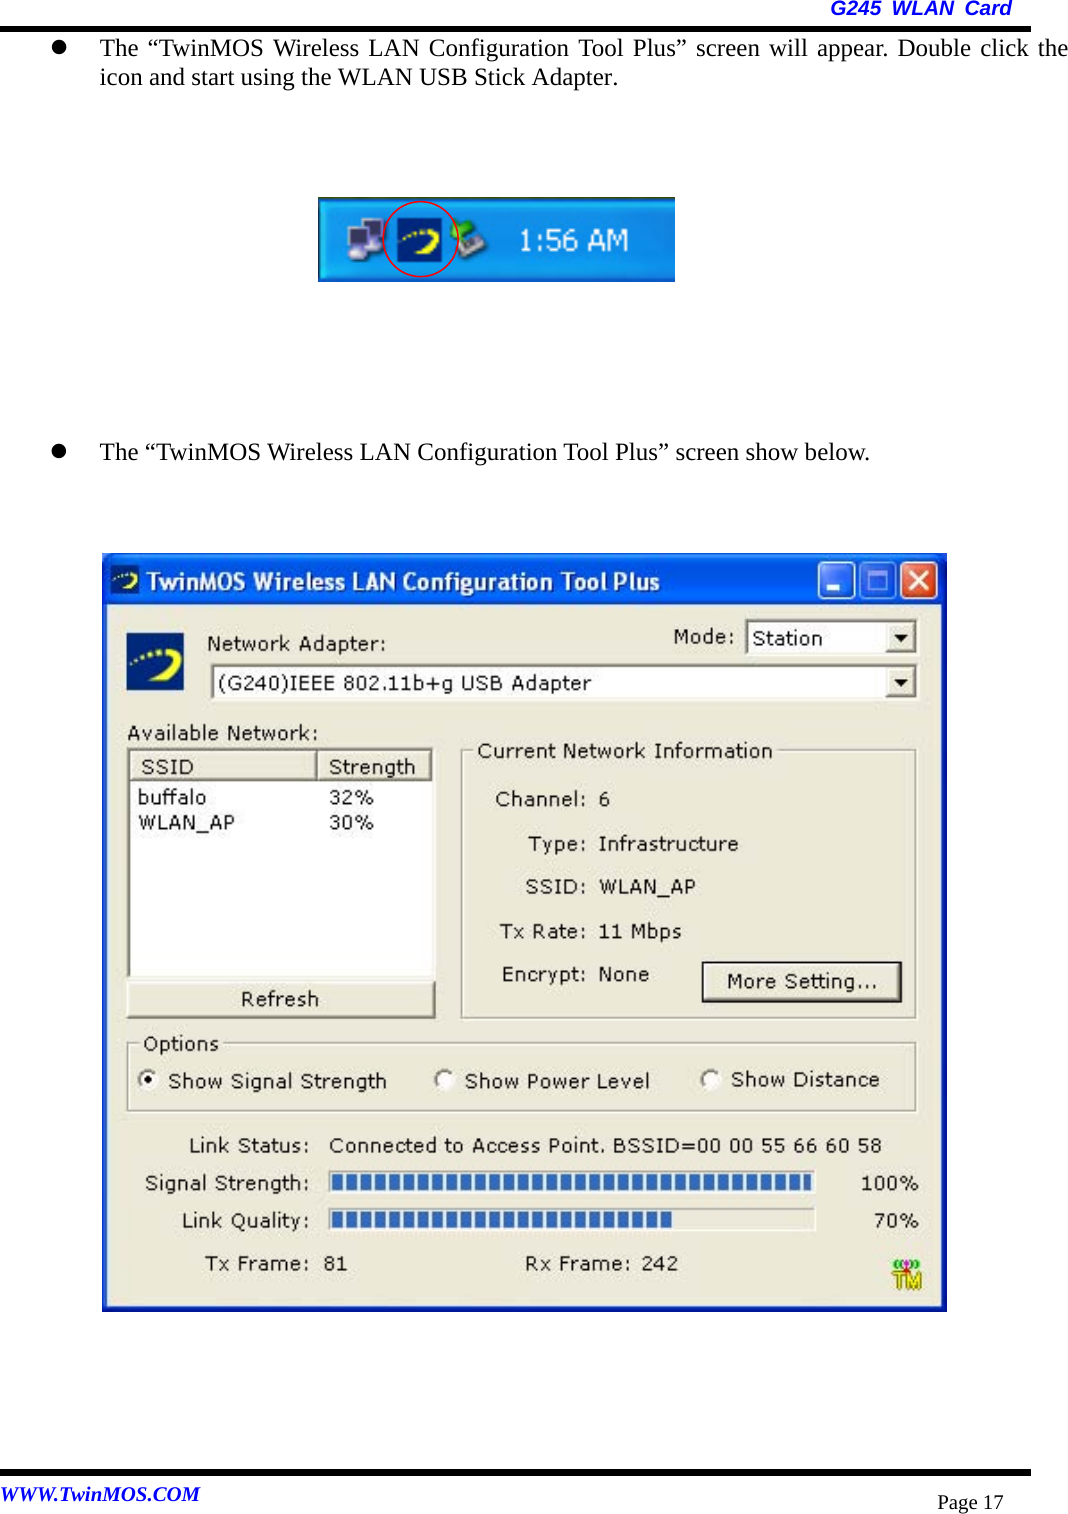   G245 WLAN Card WWW.TwinMOS.COM  Page 17  The “TwinMOS Wireless LAN Configuration Tool Plus” screen will appear. Double click the icon and start using the WLAN USB Stick Adapter.           The “TwinMOS Wireless LAN Configuration Tool Plus” screen show below.                        